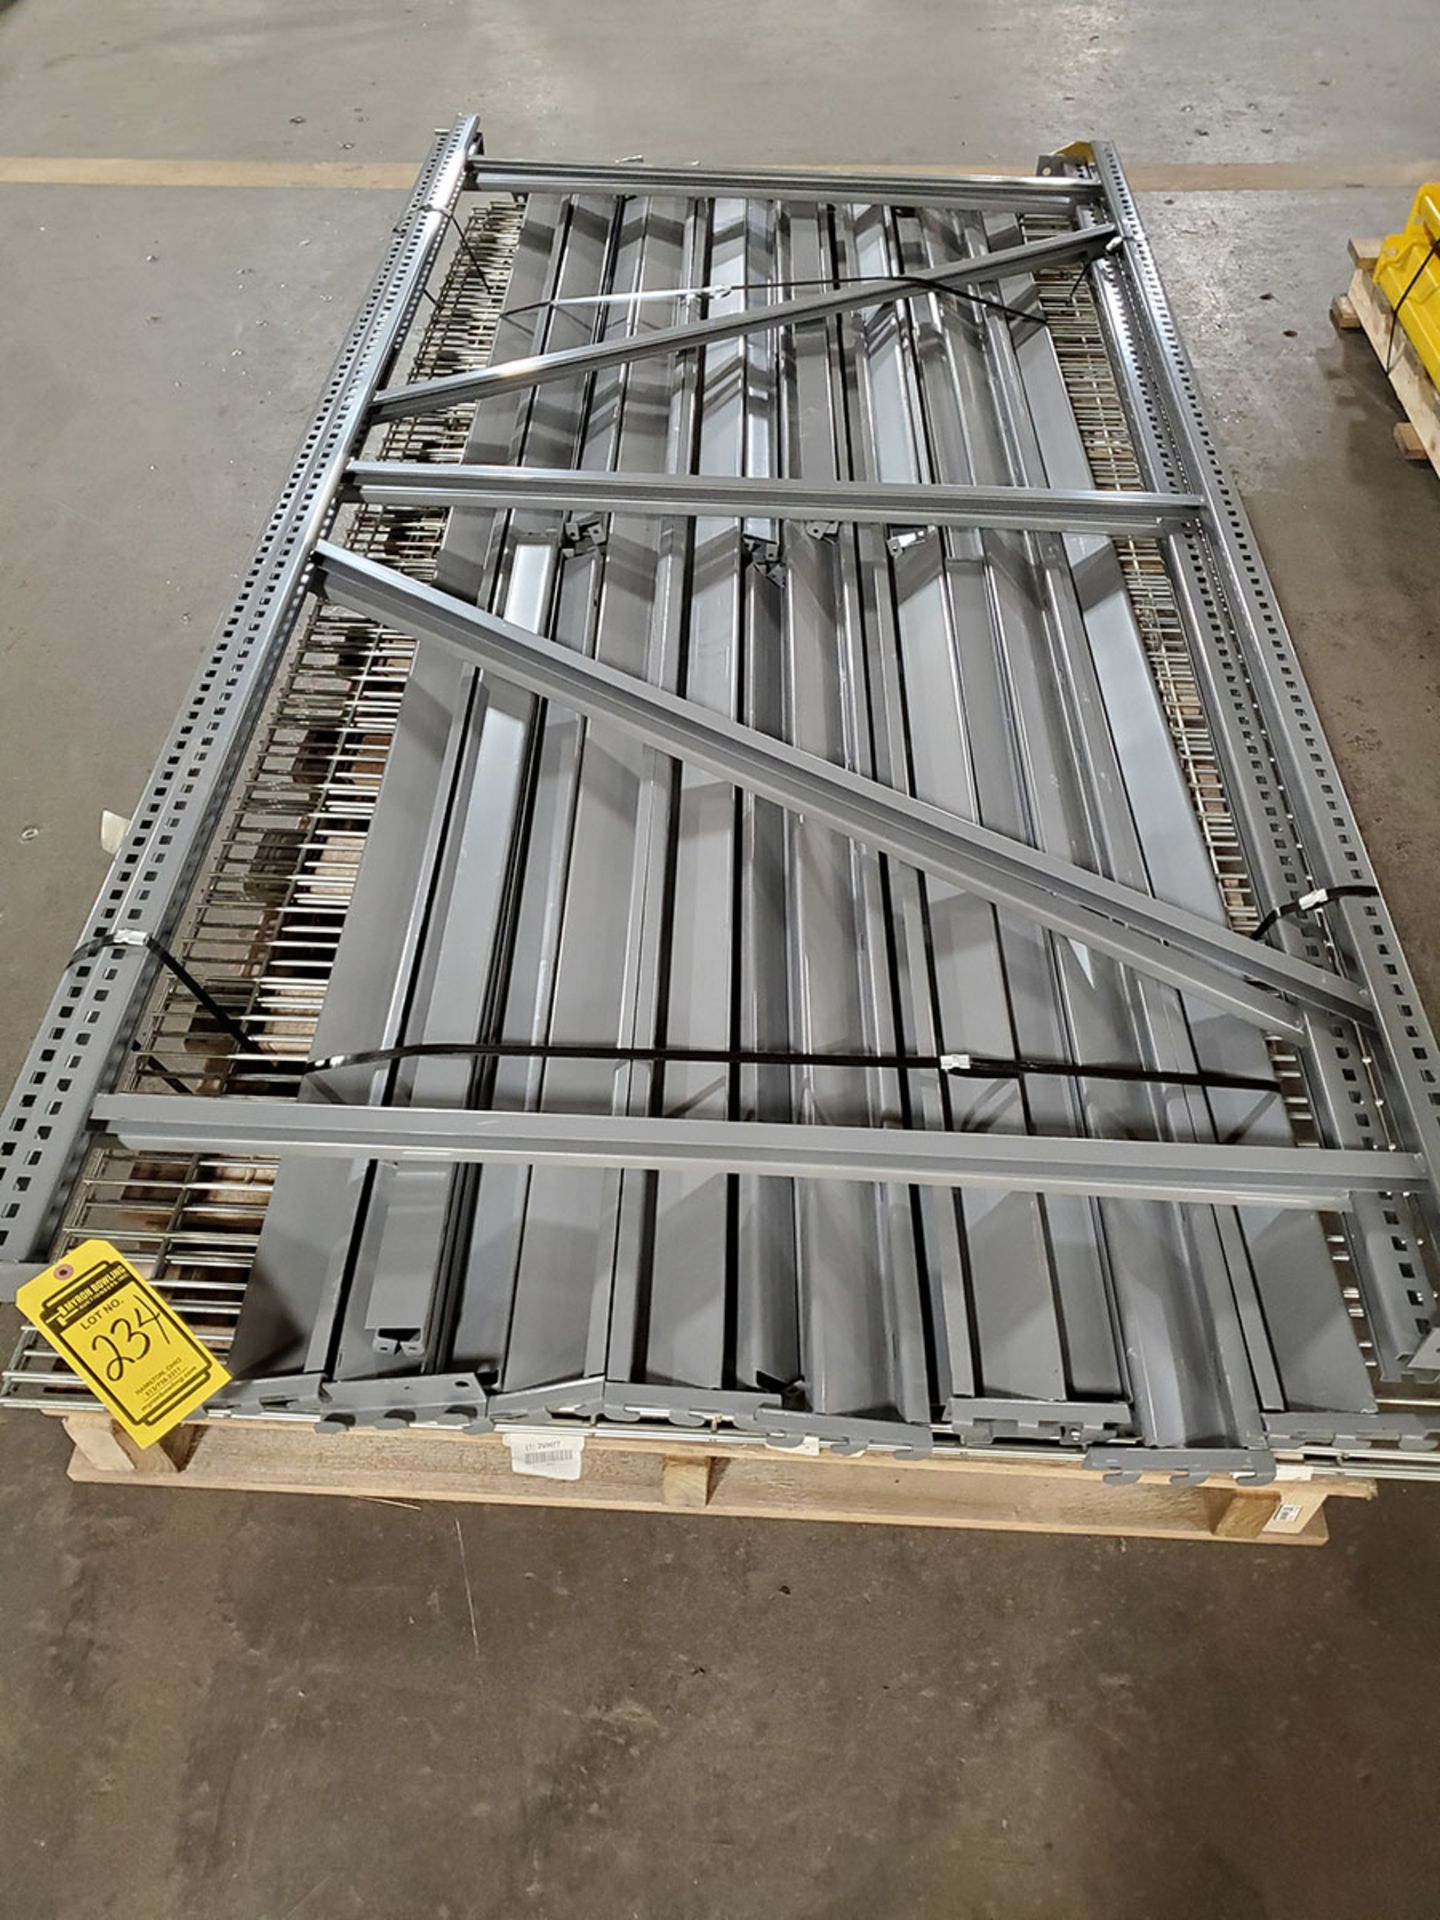 LOT OF (6) SKIDS OF MISC. LIGHT DUTY SHELVING RACK WITH WIRE DECKING - Image 5 of 8